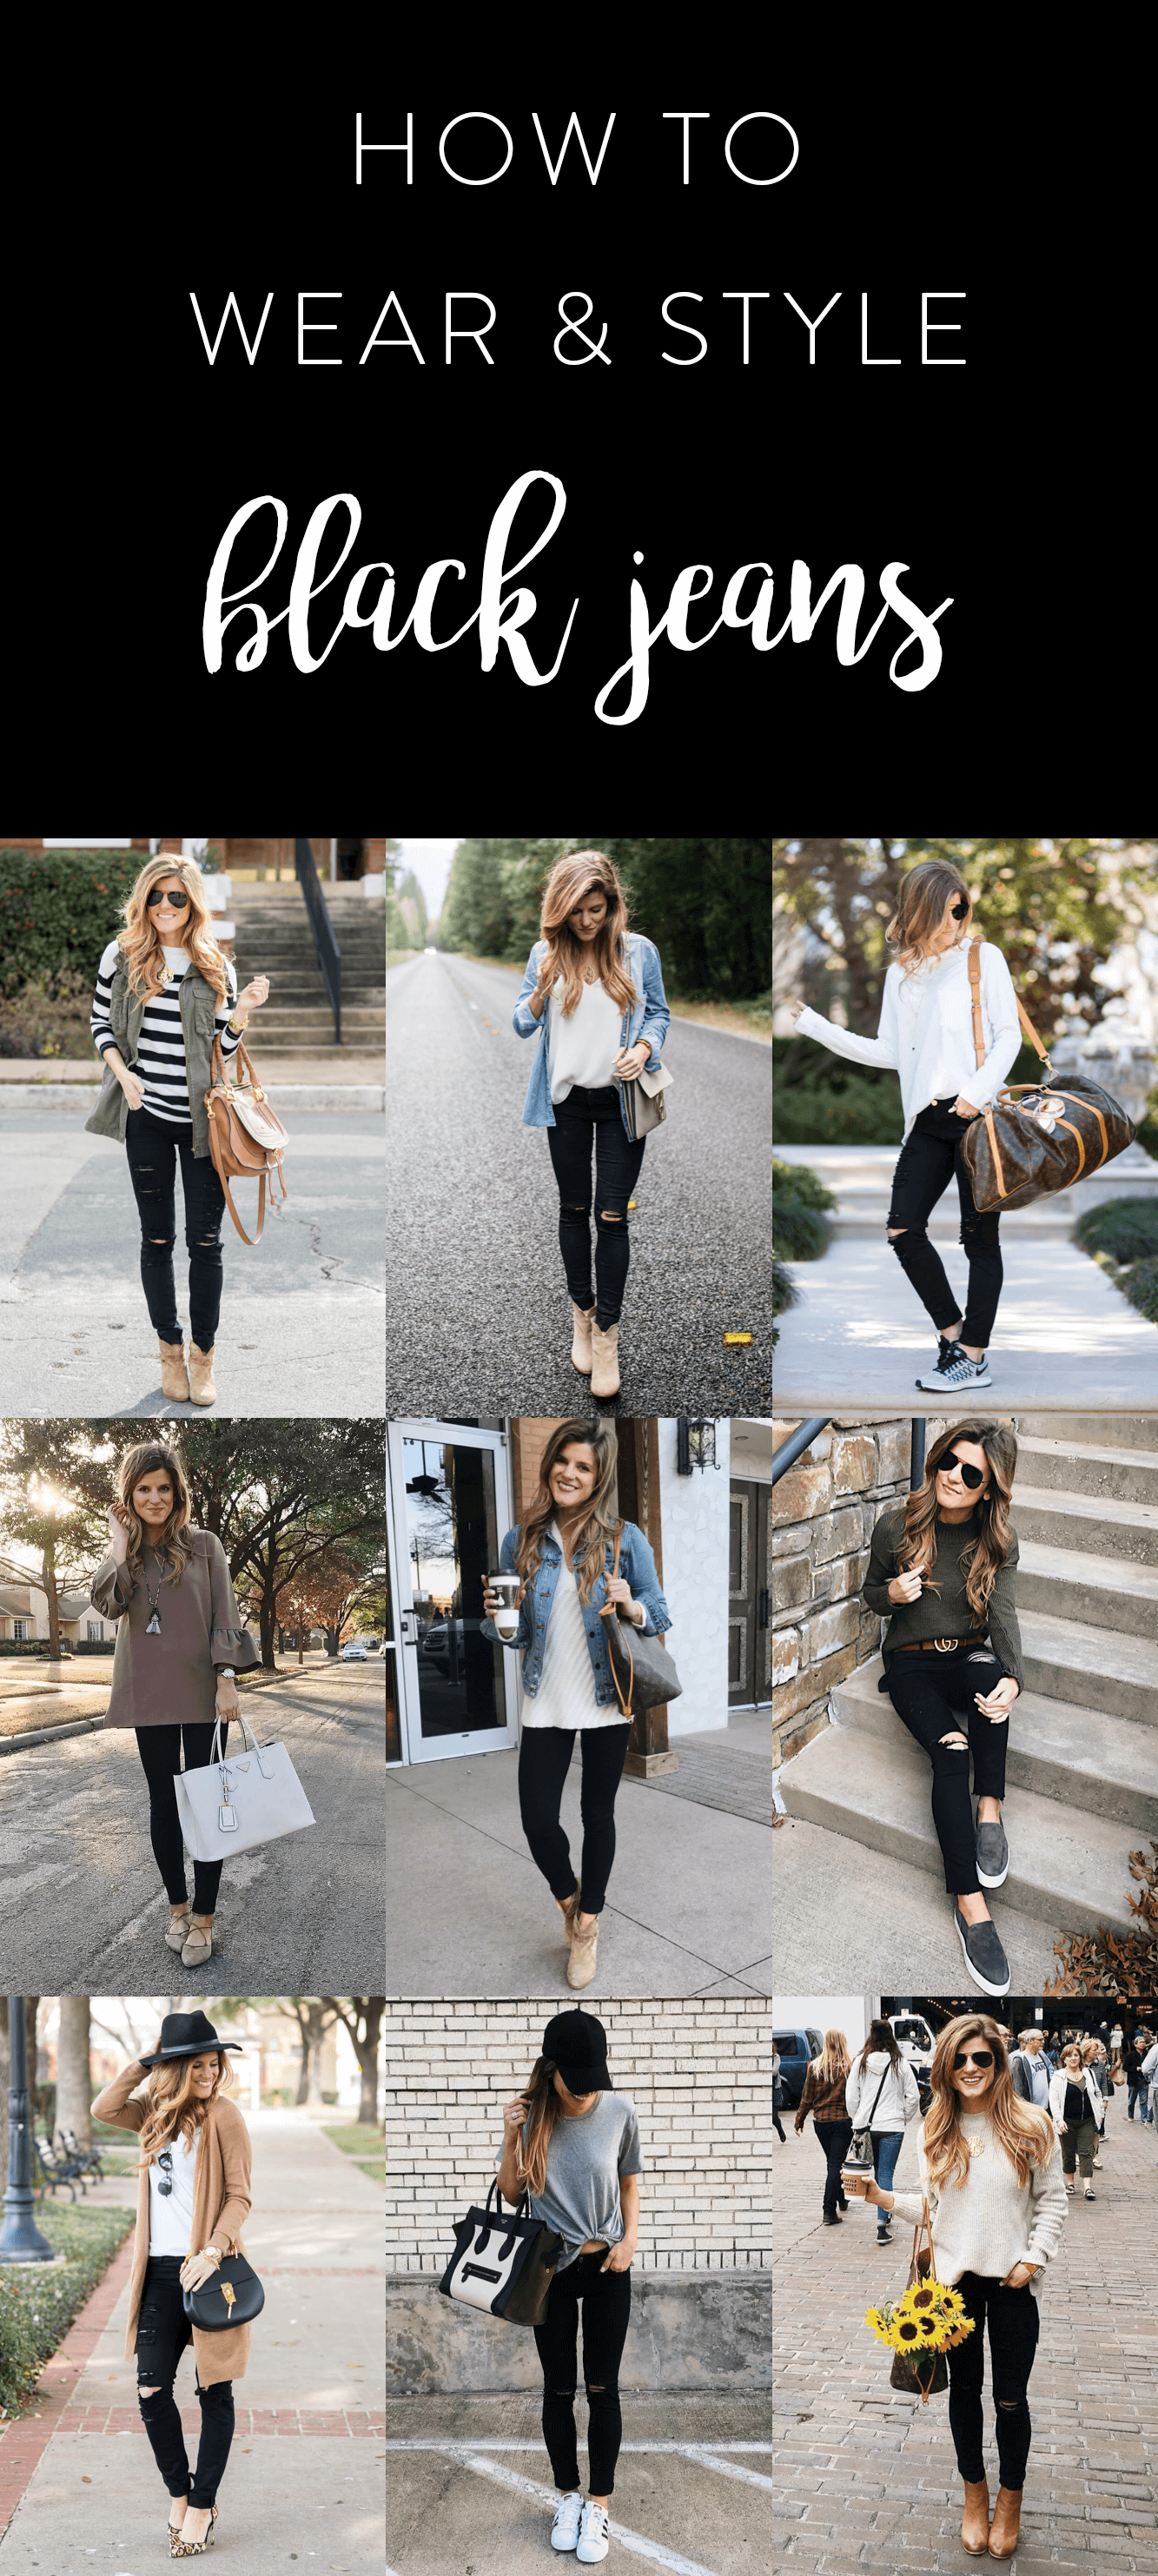 What to wear with black jeans - 30+ Black Jeans Outfit Ideas